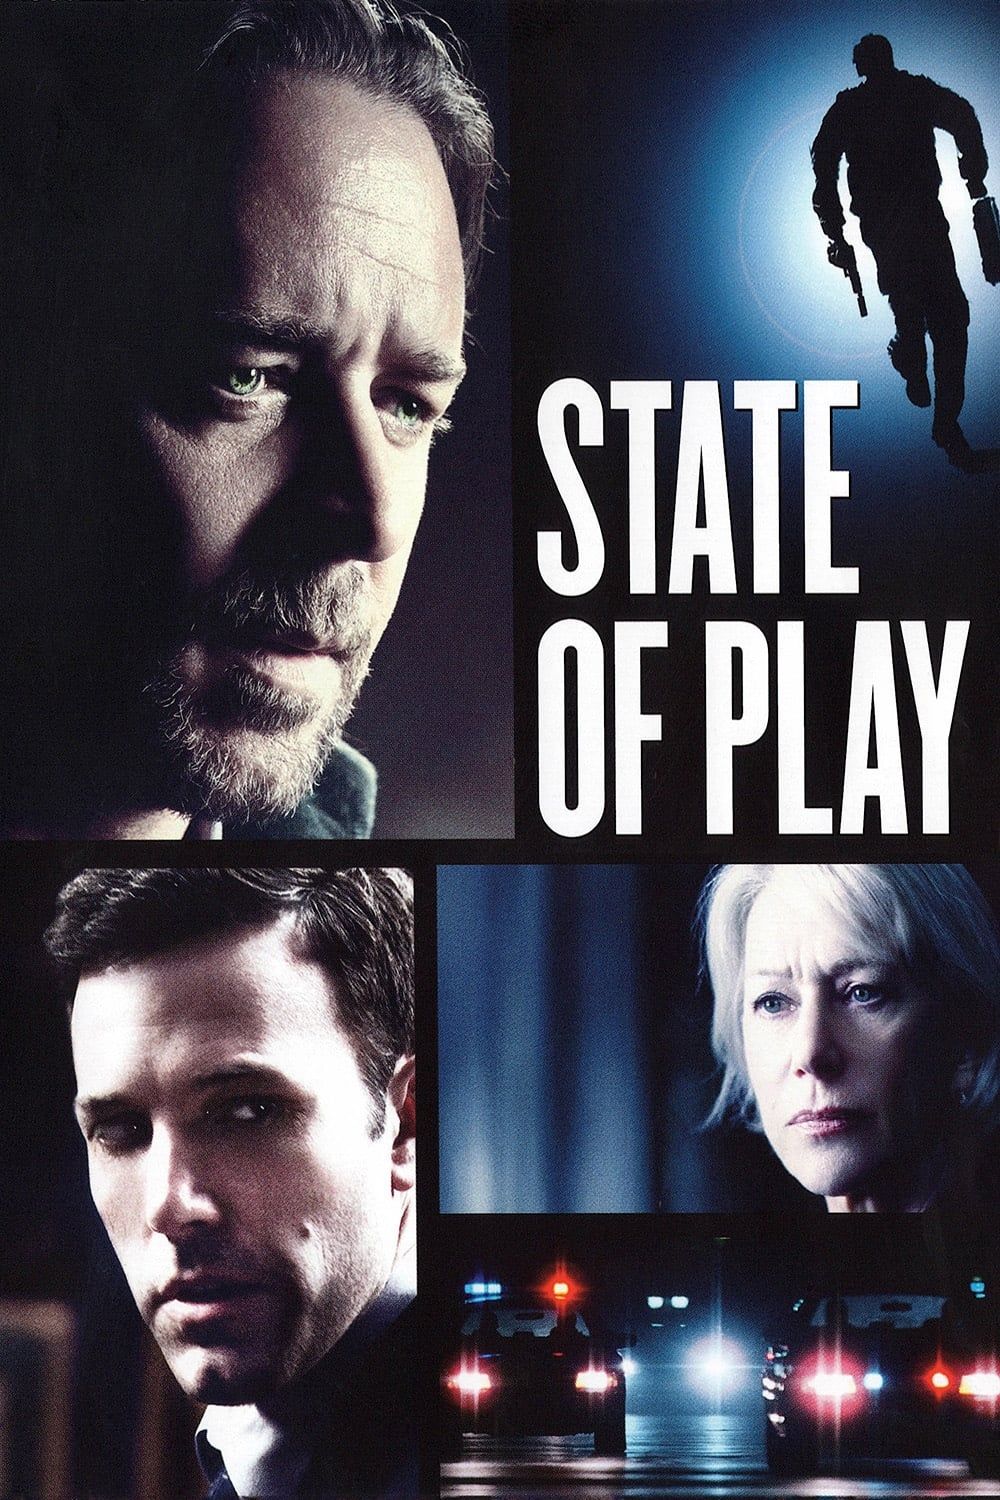 1022 - State of Play (2009)